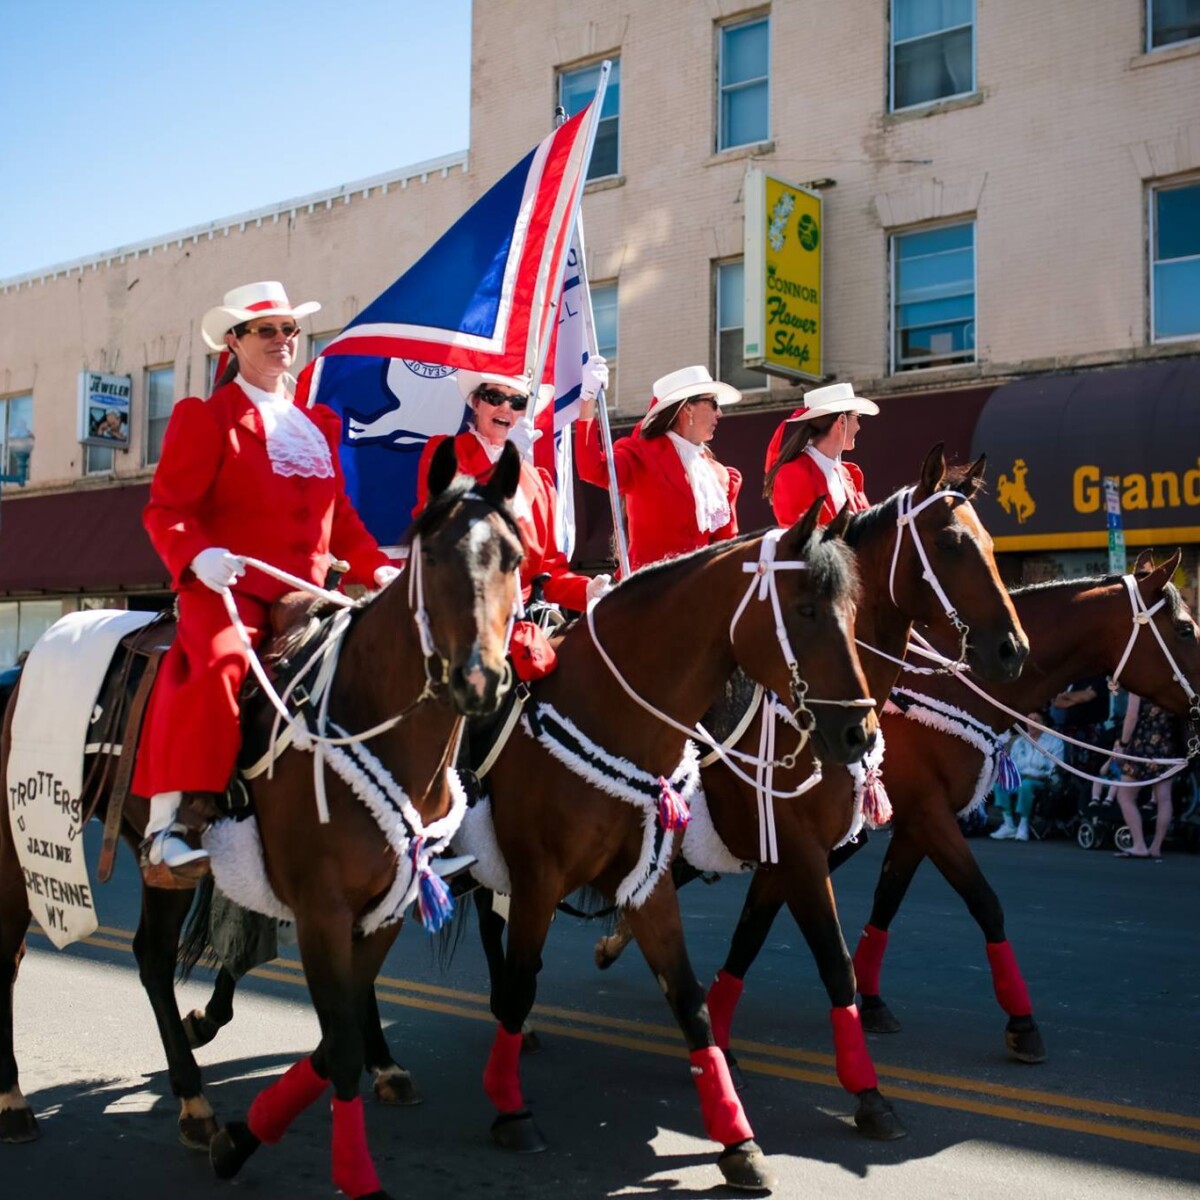 Four women dressed in bright red, ceremonial Western attire ride horses down Main Street.